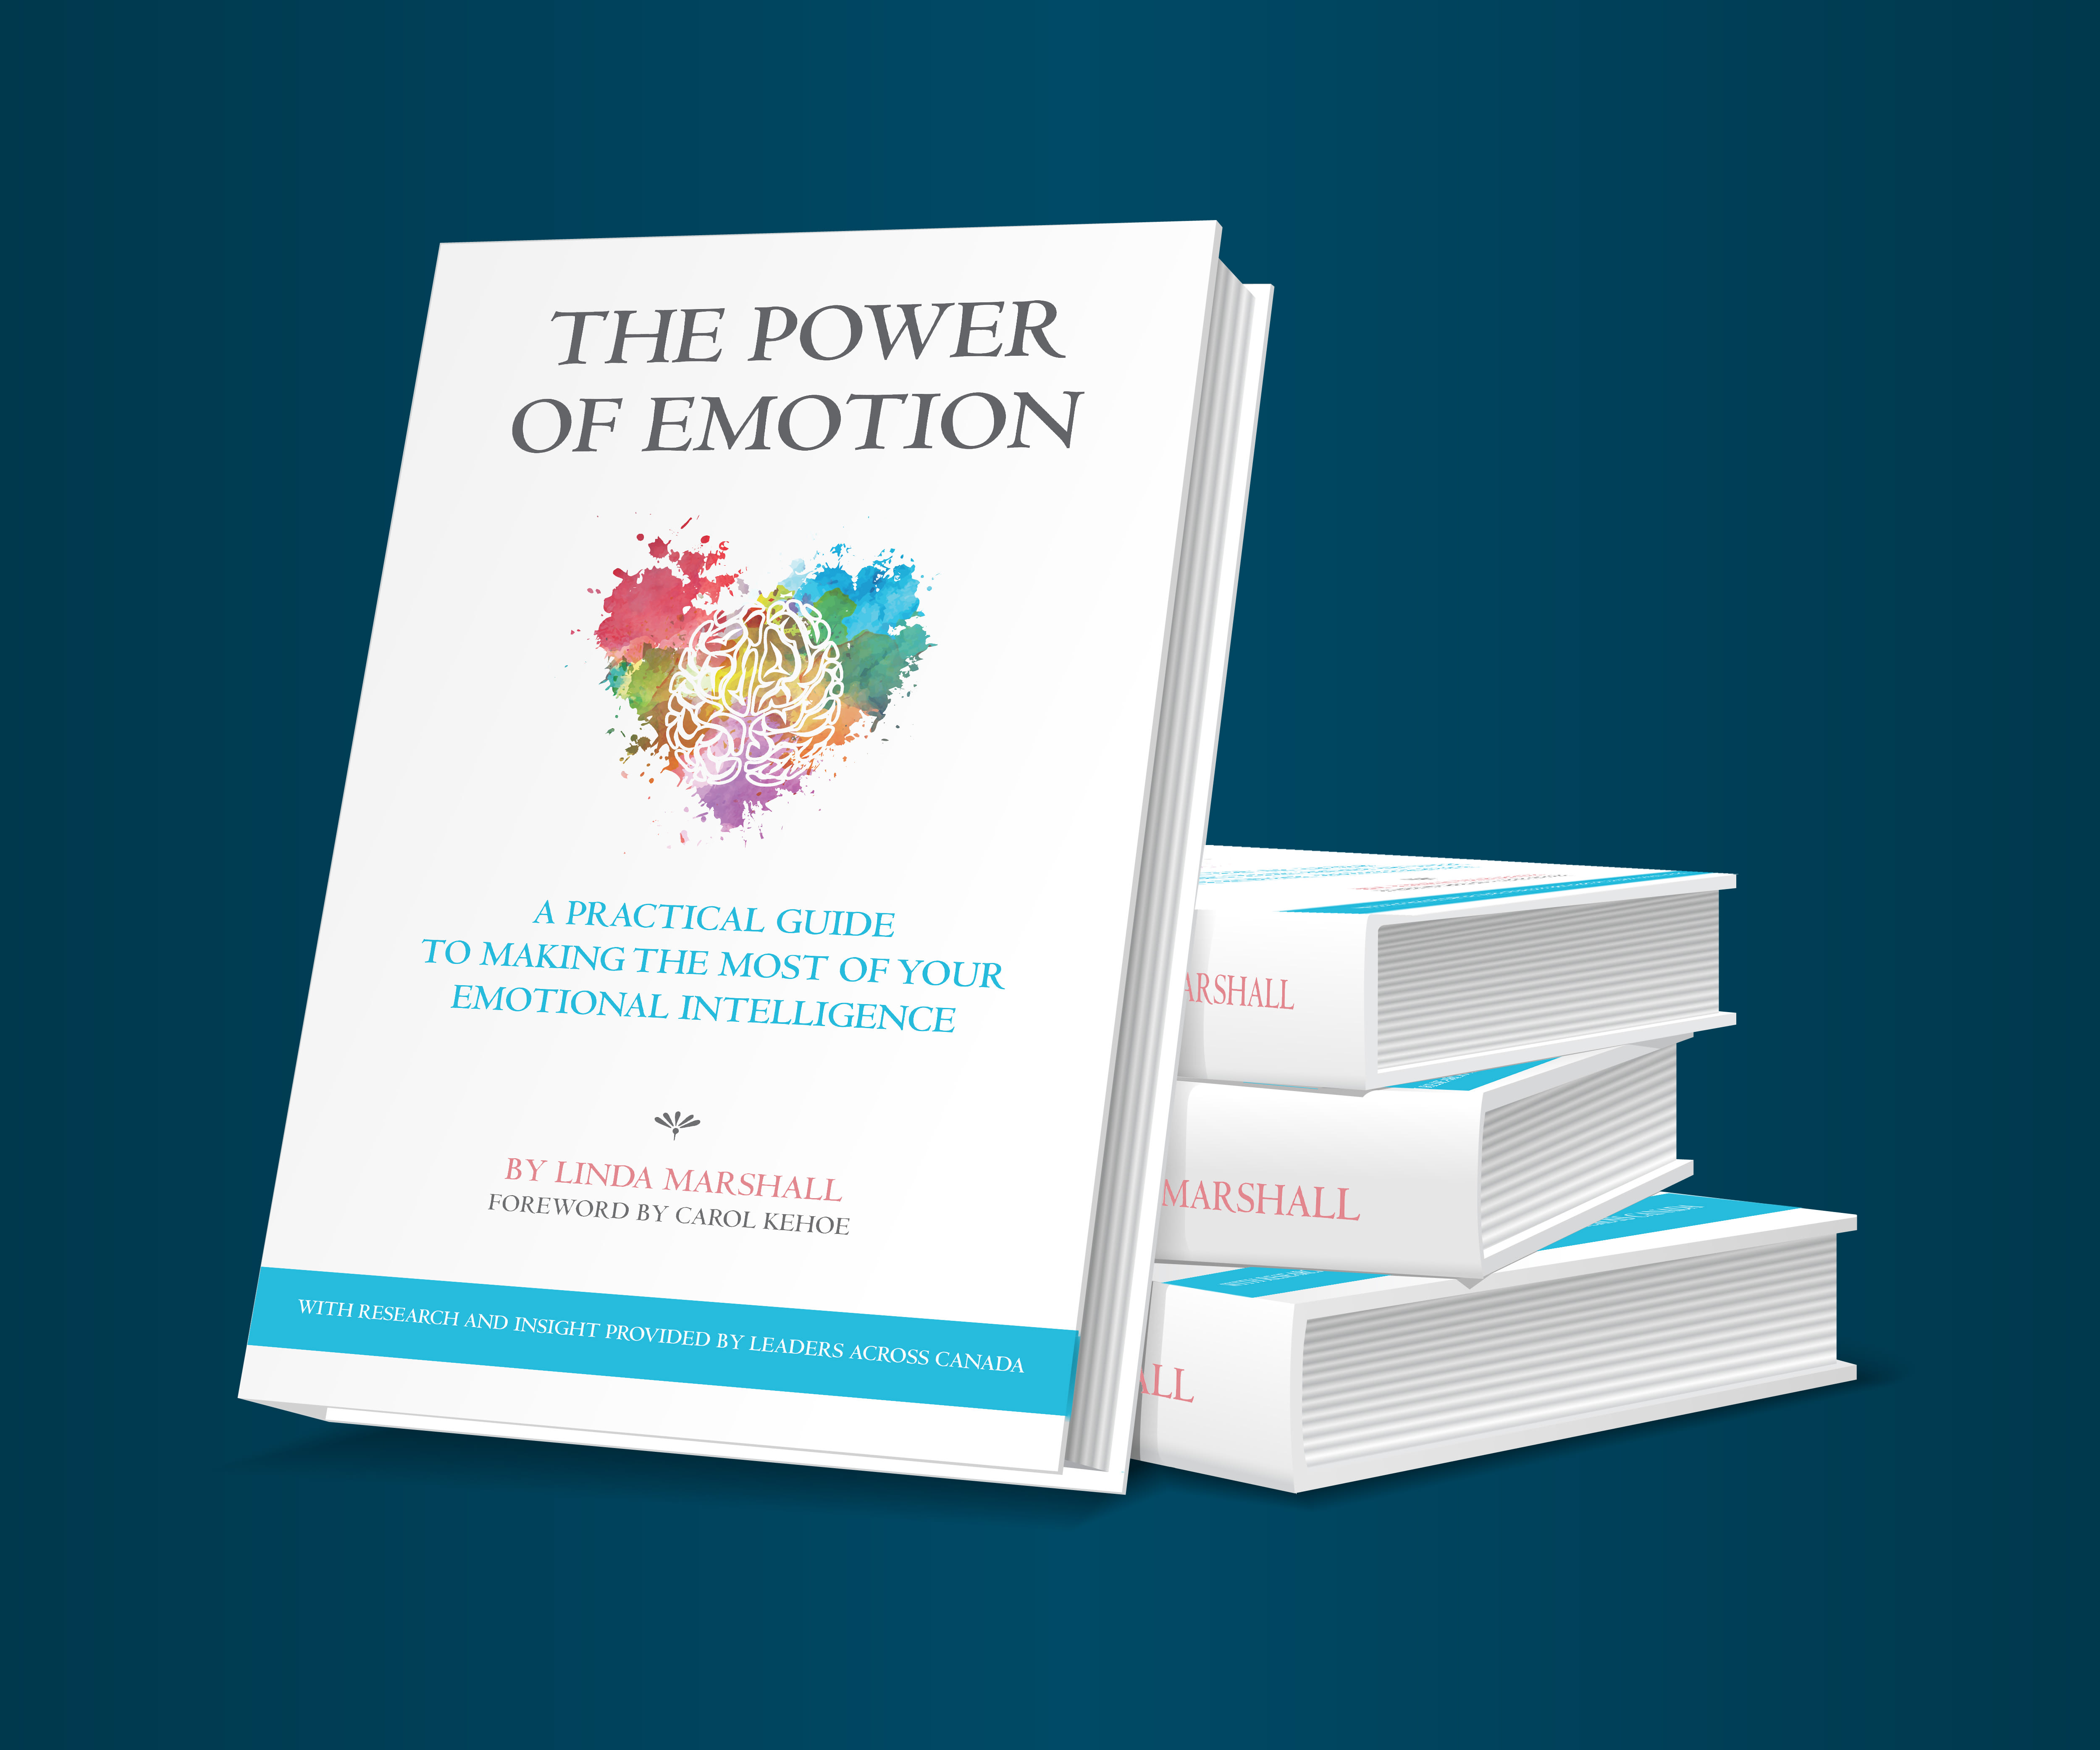 The Power of Emotion Book, Linda Marshall Author